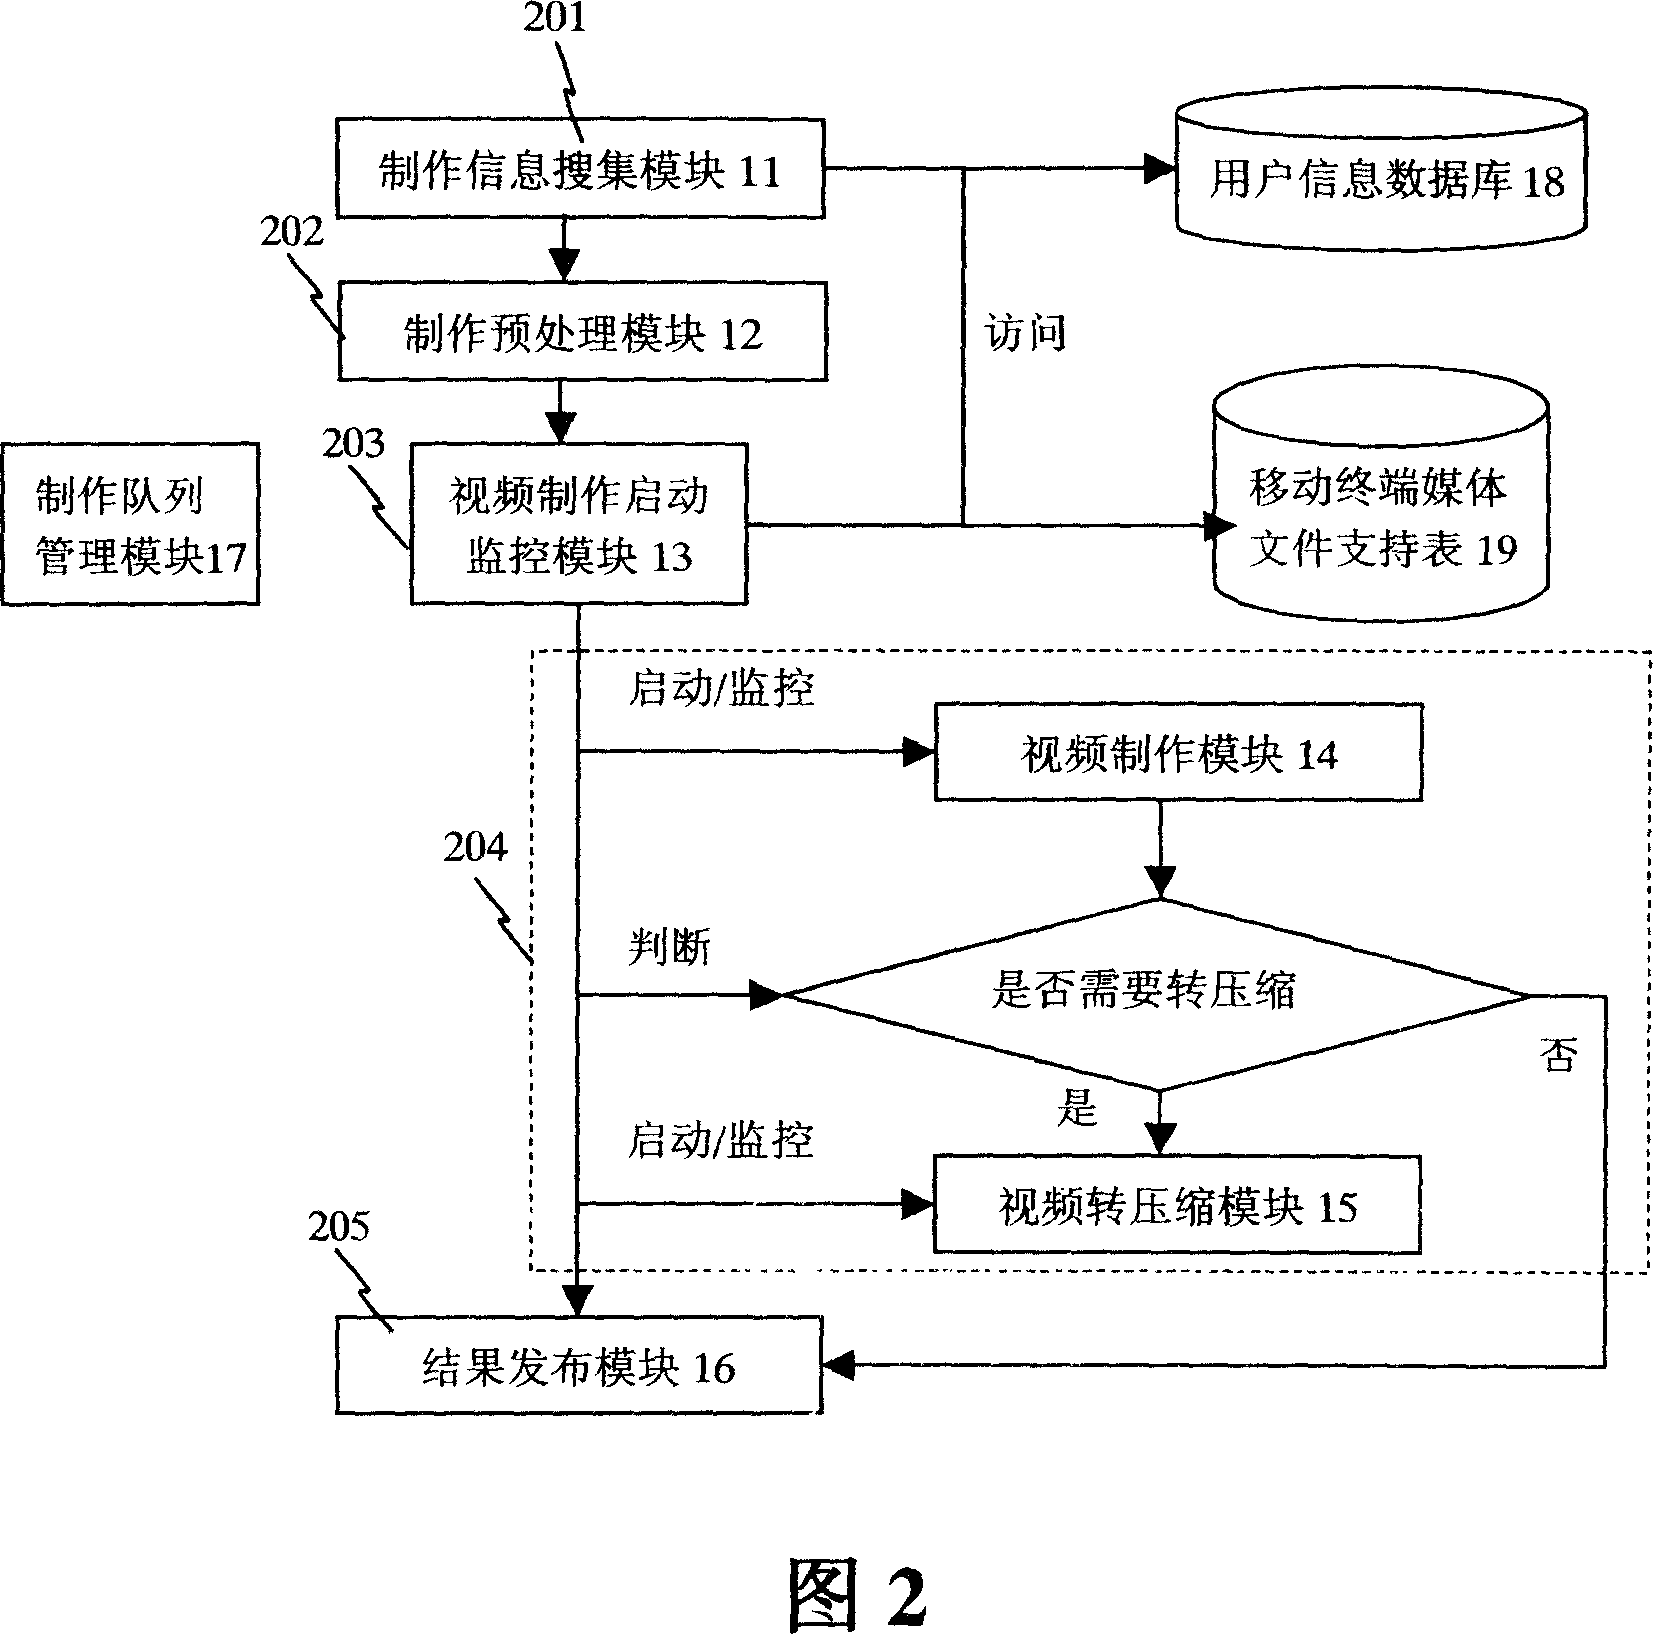 Method and system for automatic video production